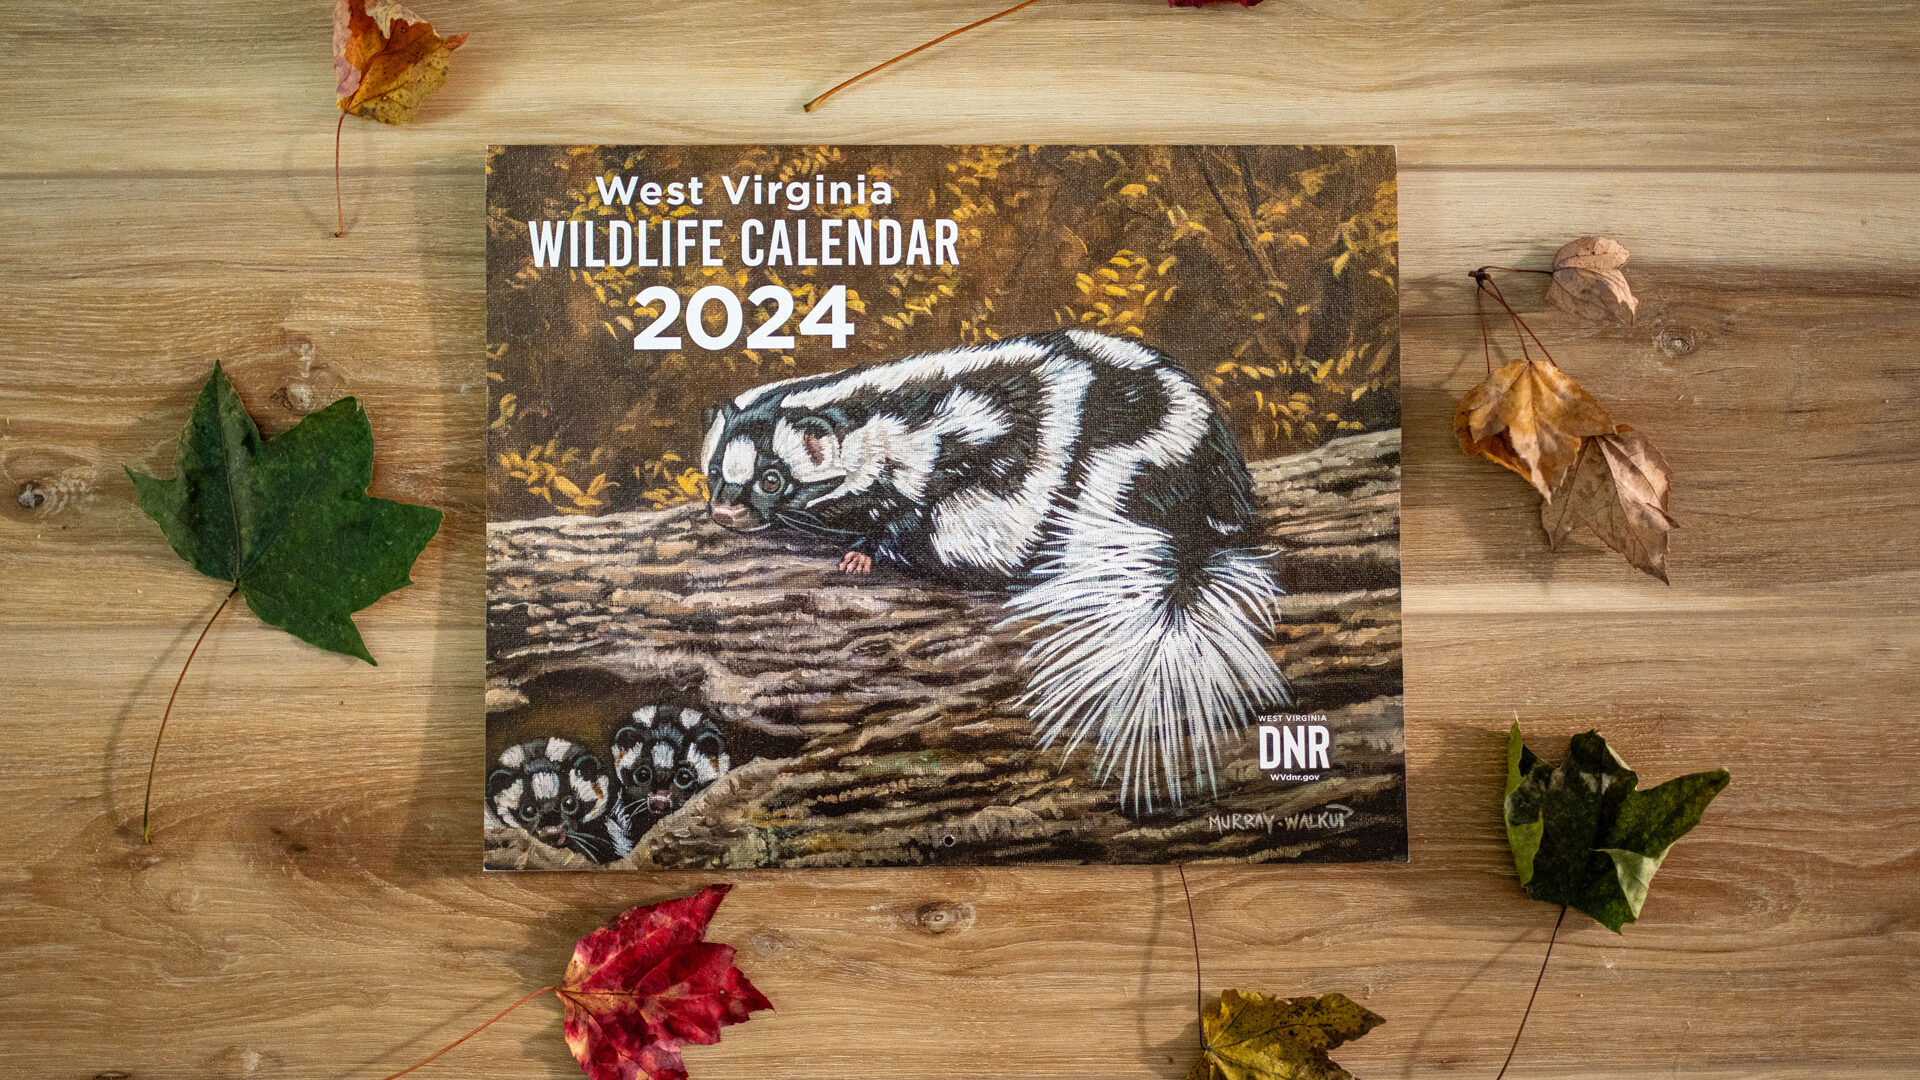 WV Wildlife Calendar The Ultimate Gift for Outdoor Enthusiasts